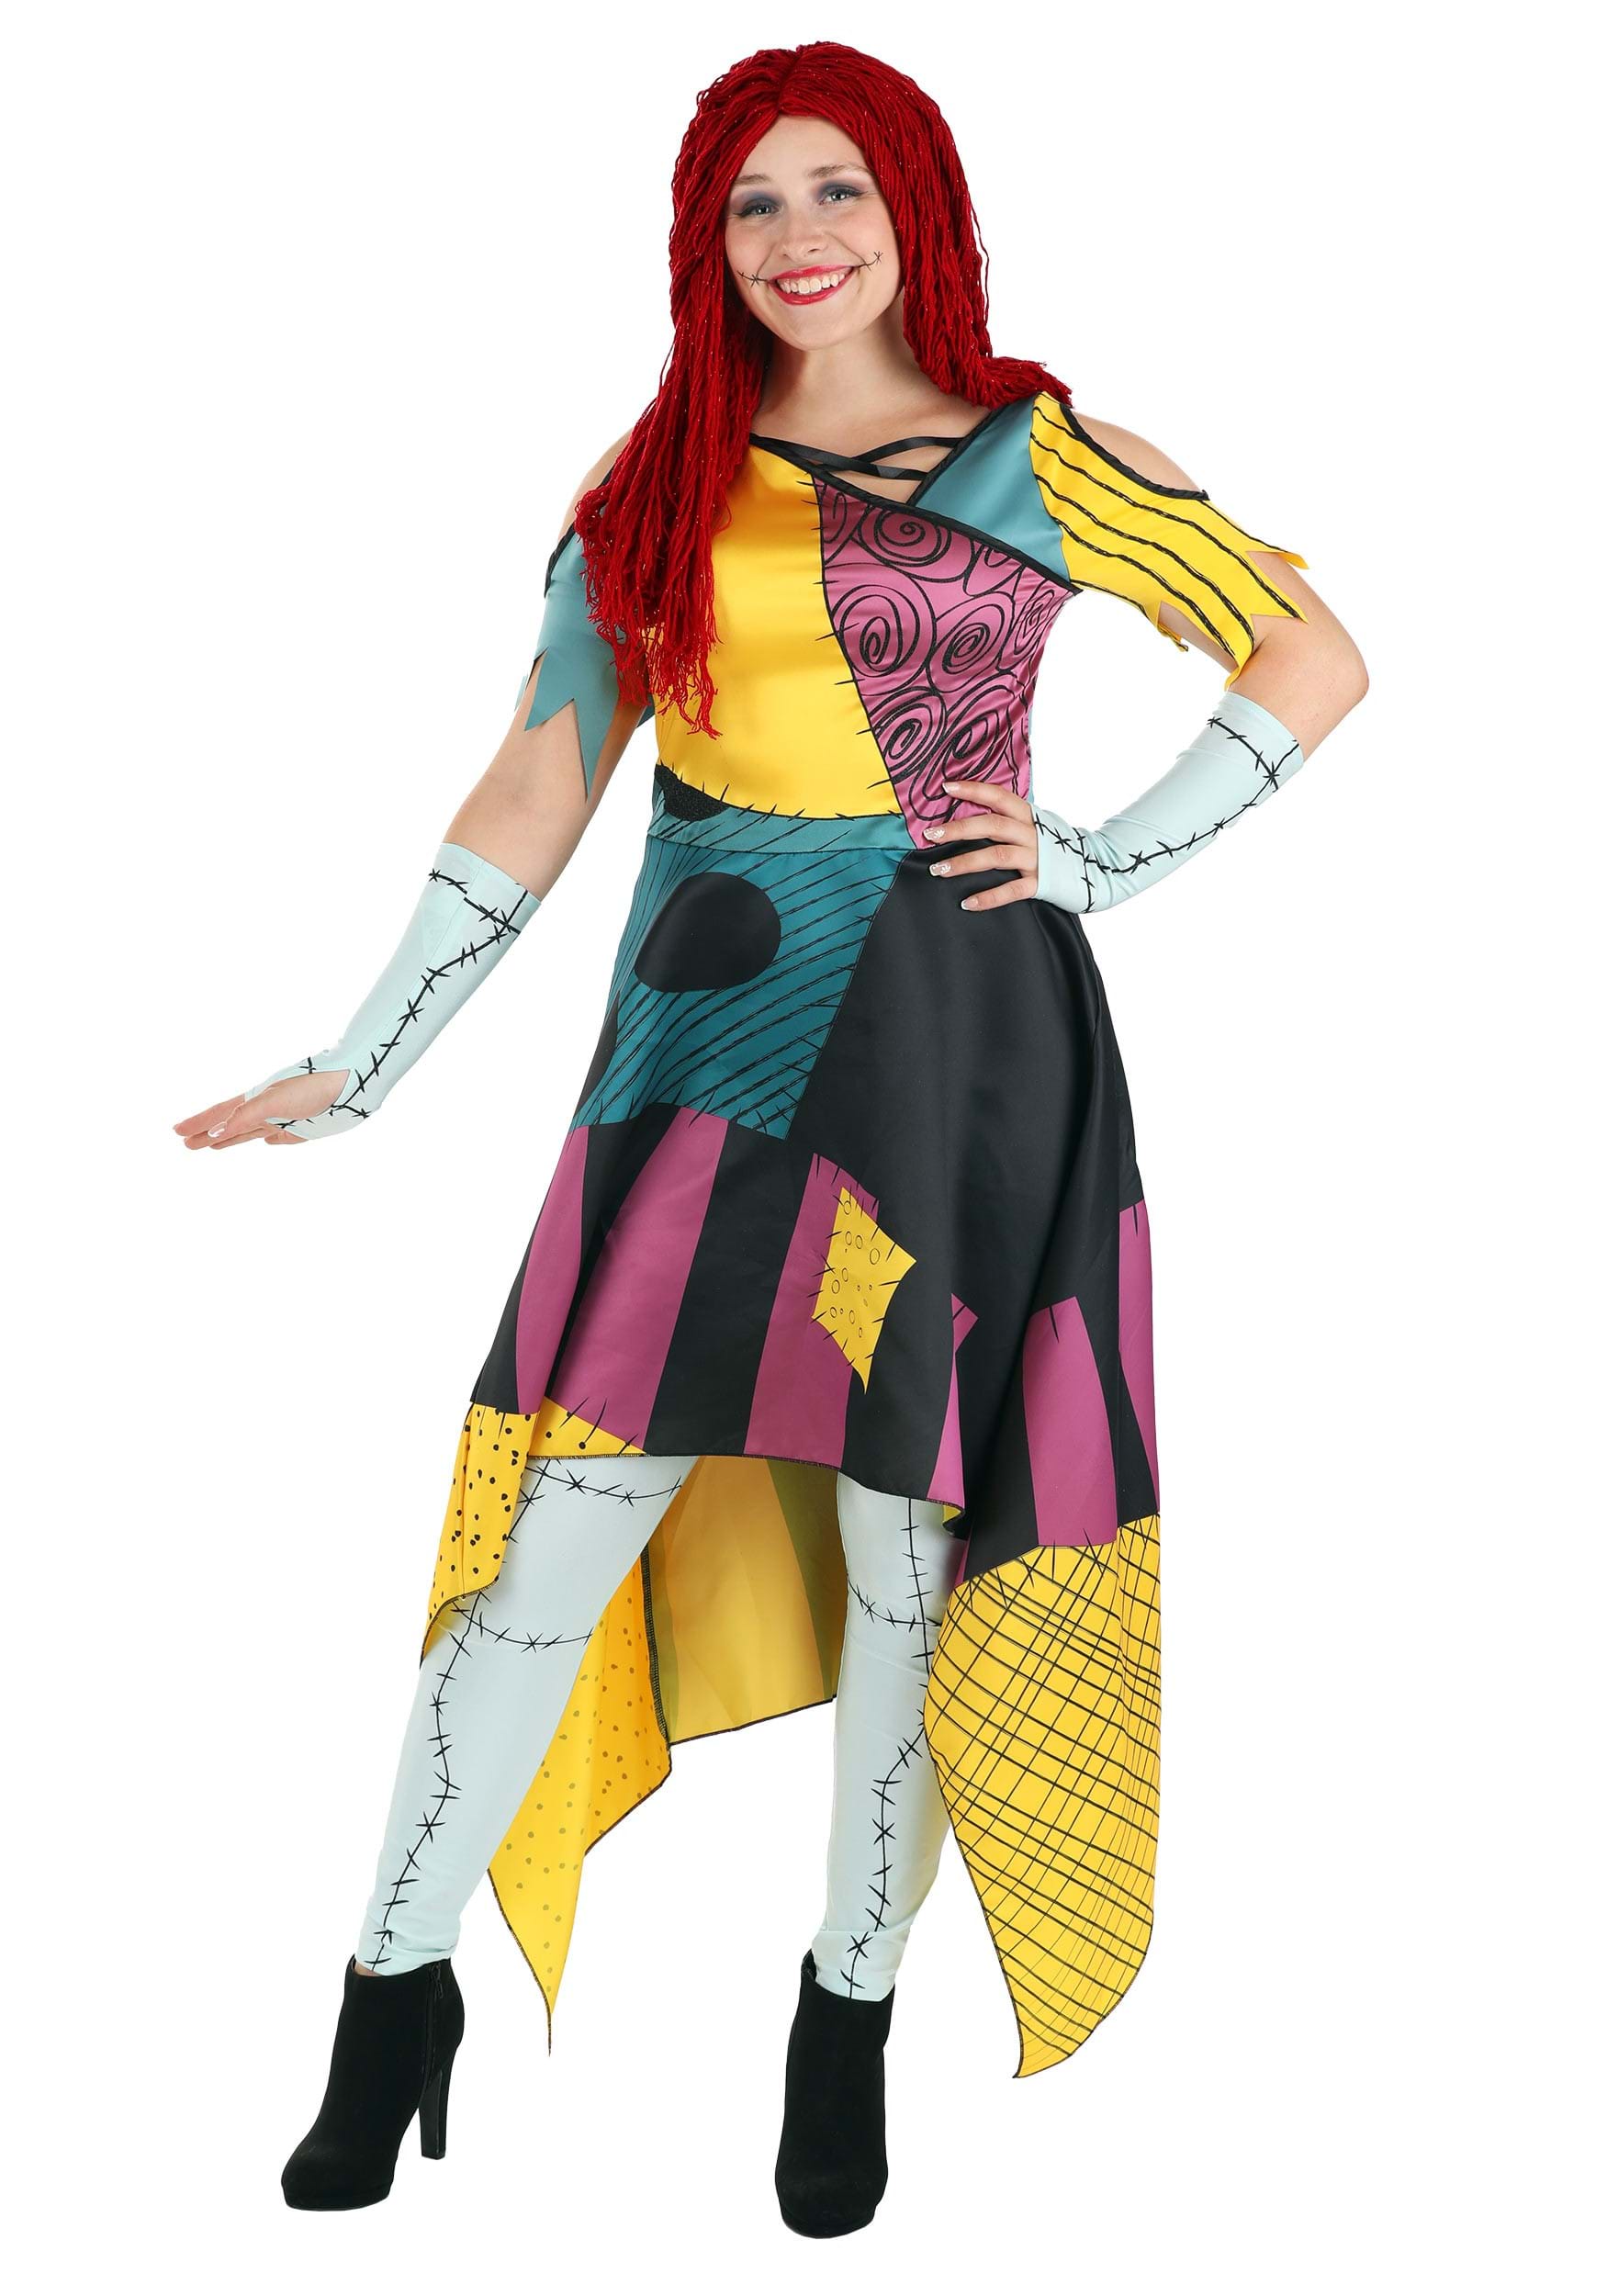 Image of Sally Prestige Adult Costume from Nightmare Before Christmas ID DI21598-S